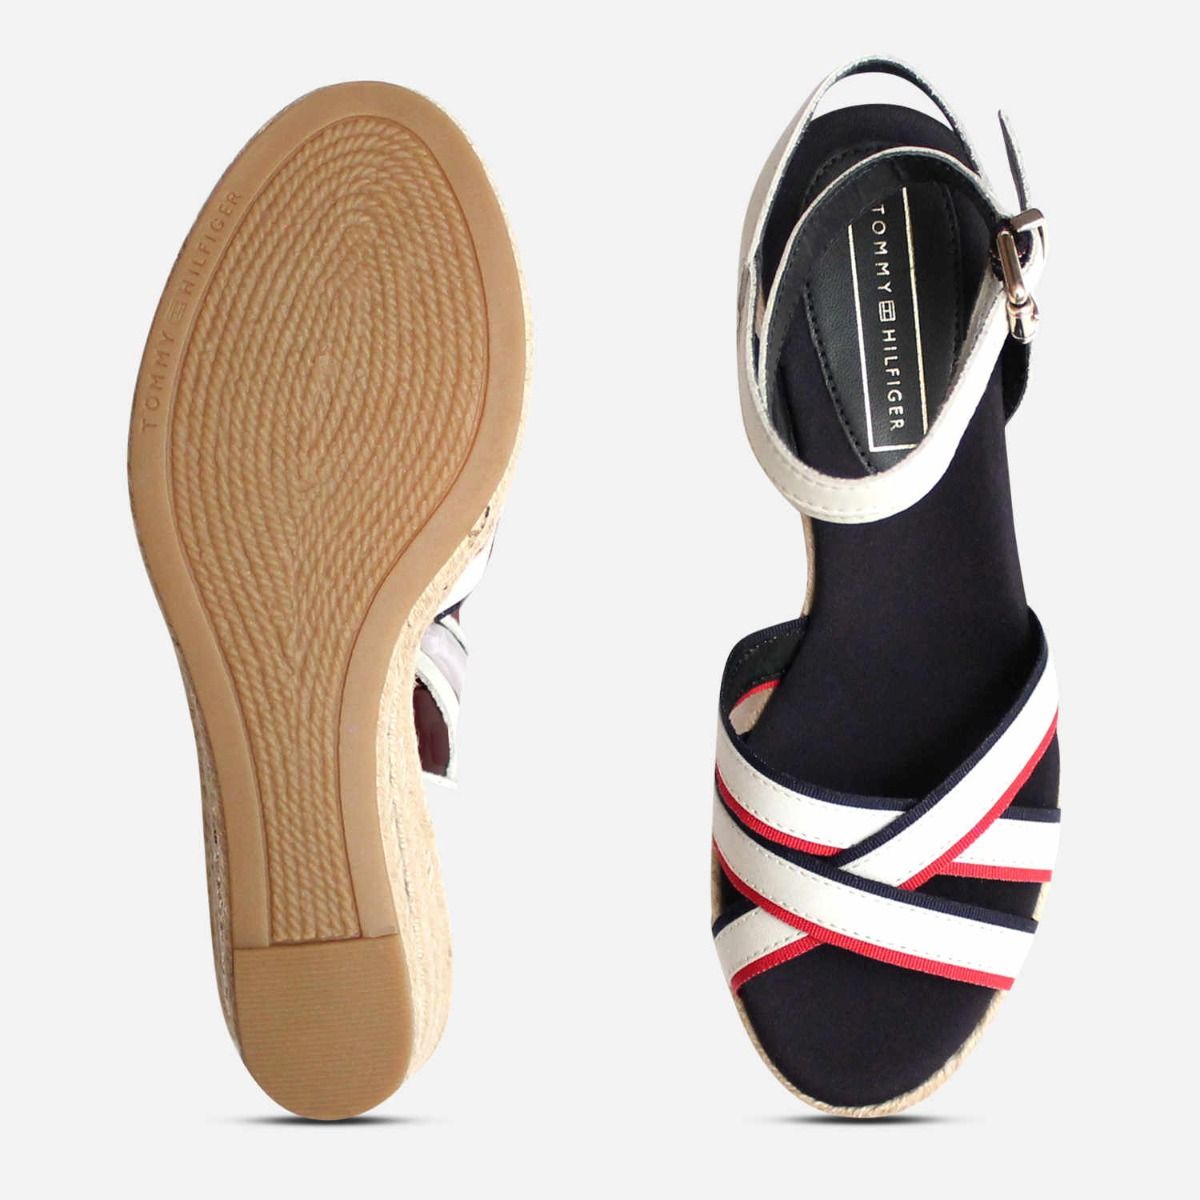 Tommy Hilfiger Red White & Blue Iconic Elba II Wedge Sandal